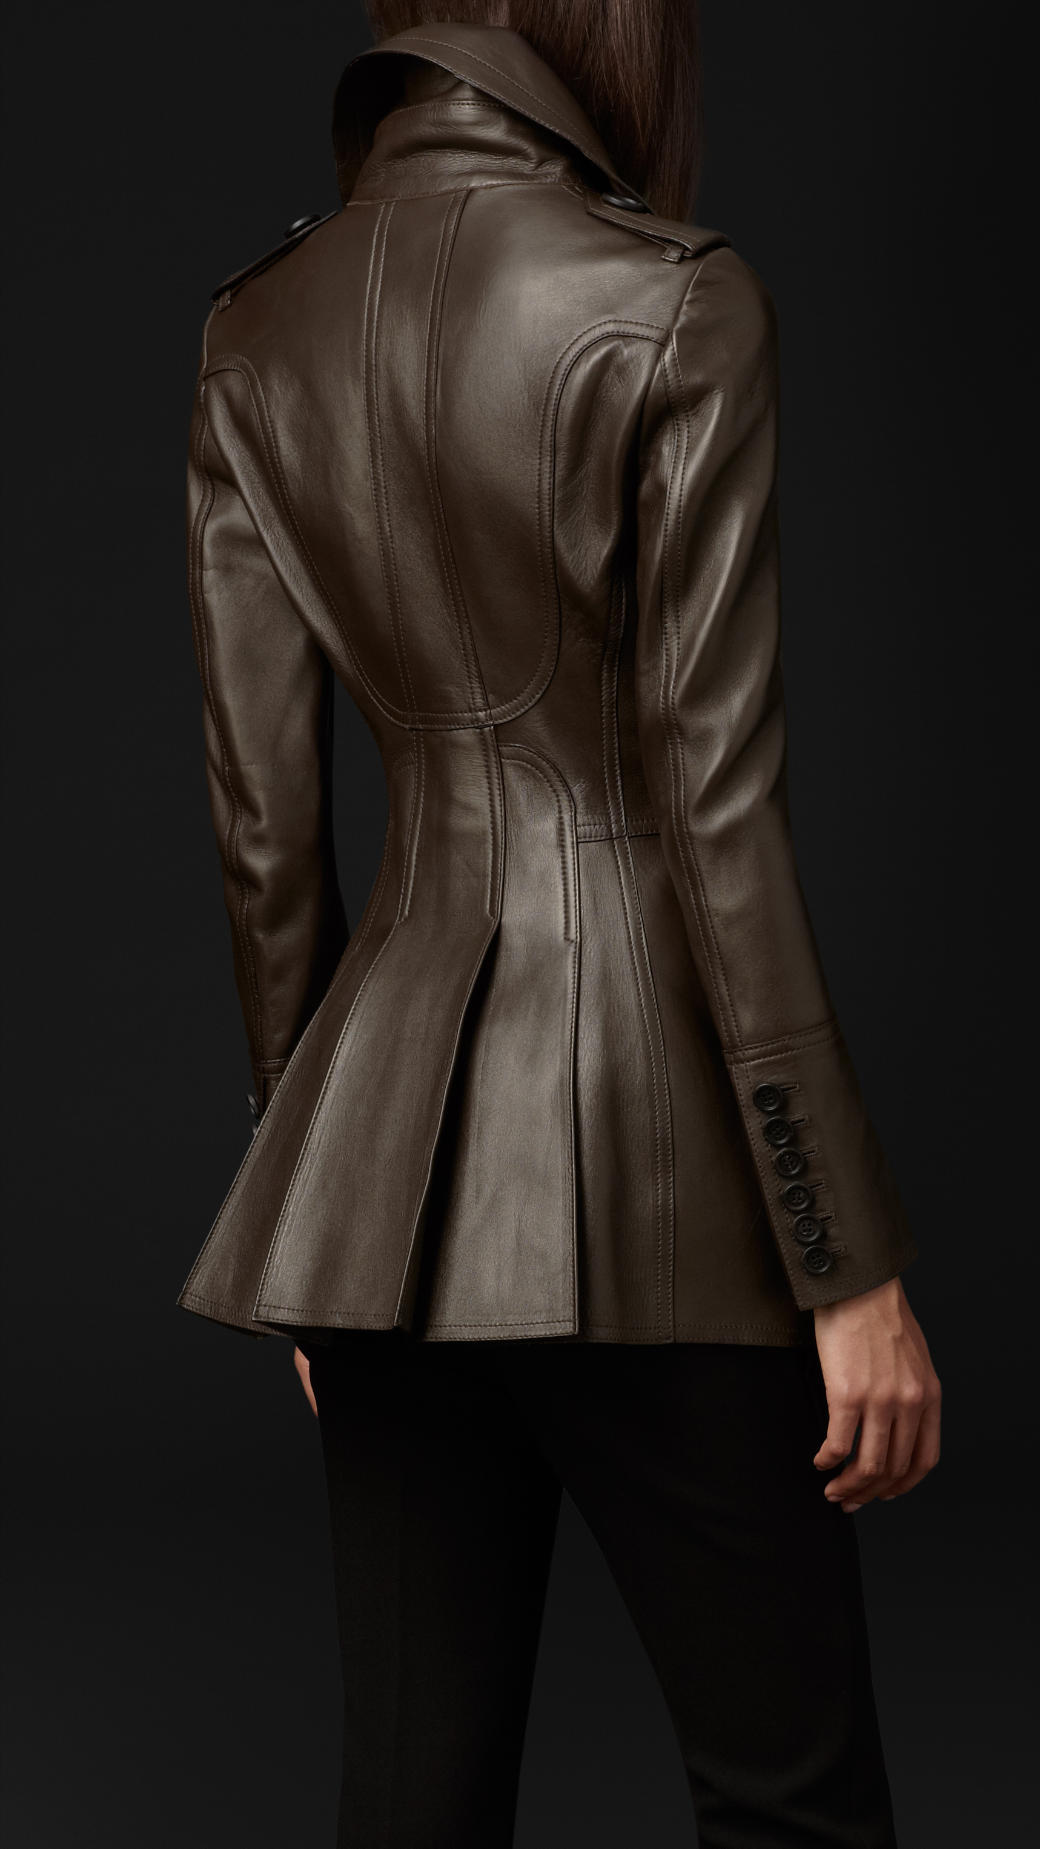 Lyst - Burberry Prorsum Bonded Leather Jacket in Brown